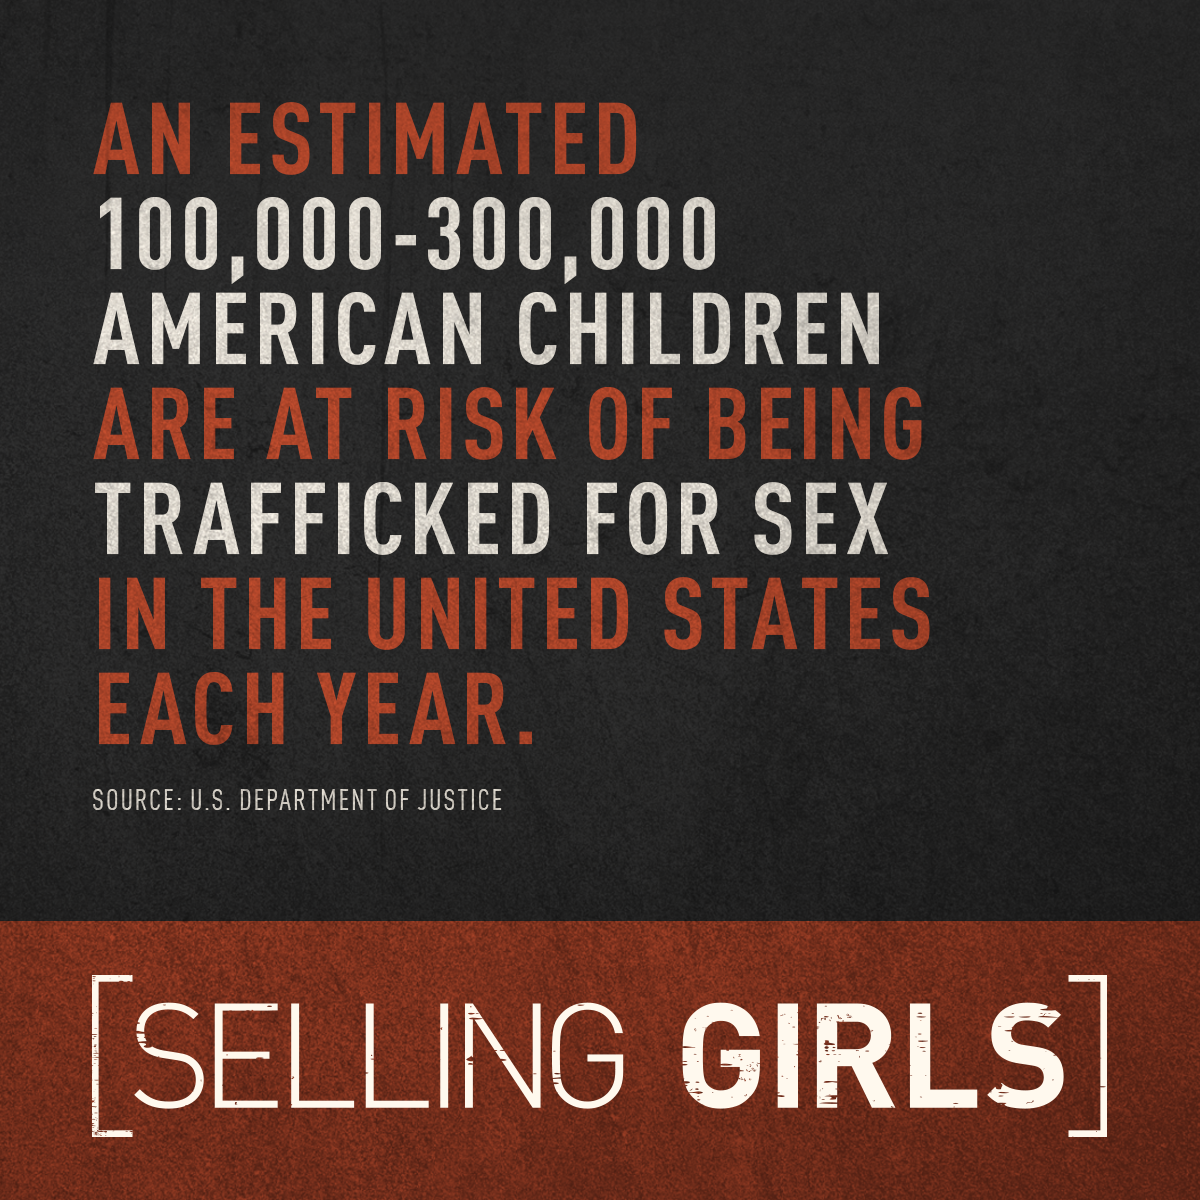 Get involved in combating human trafficking